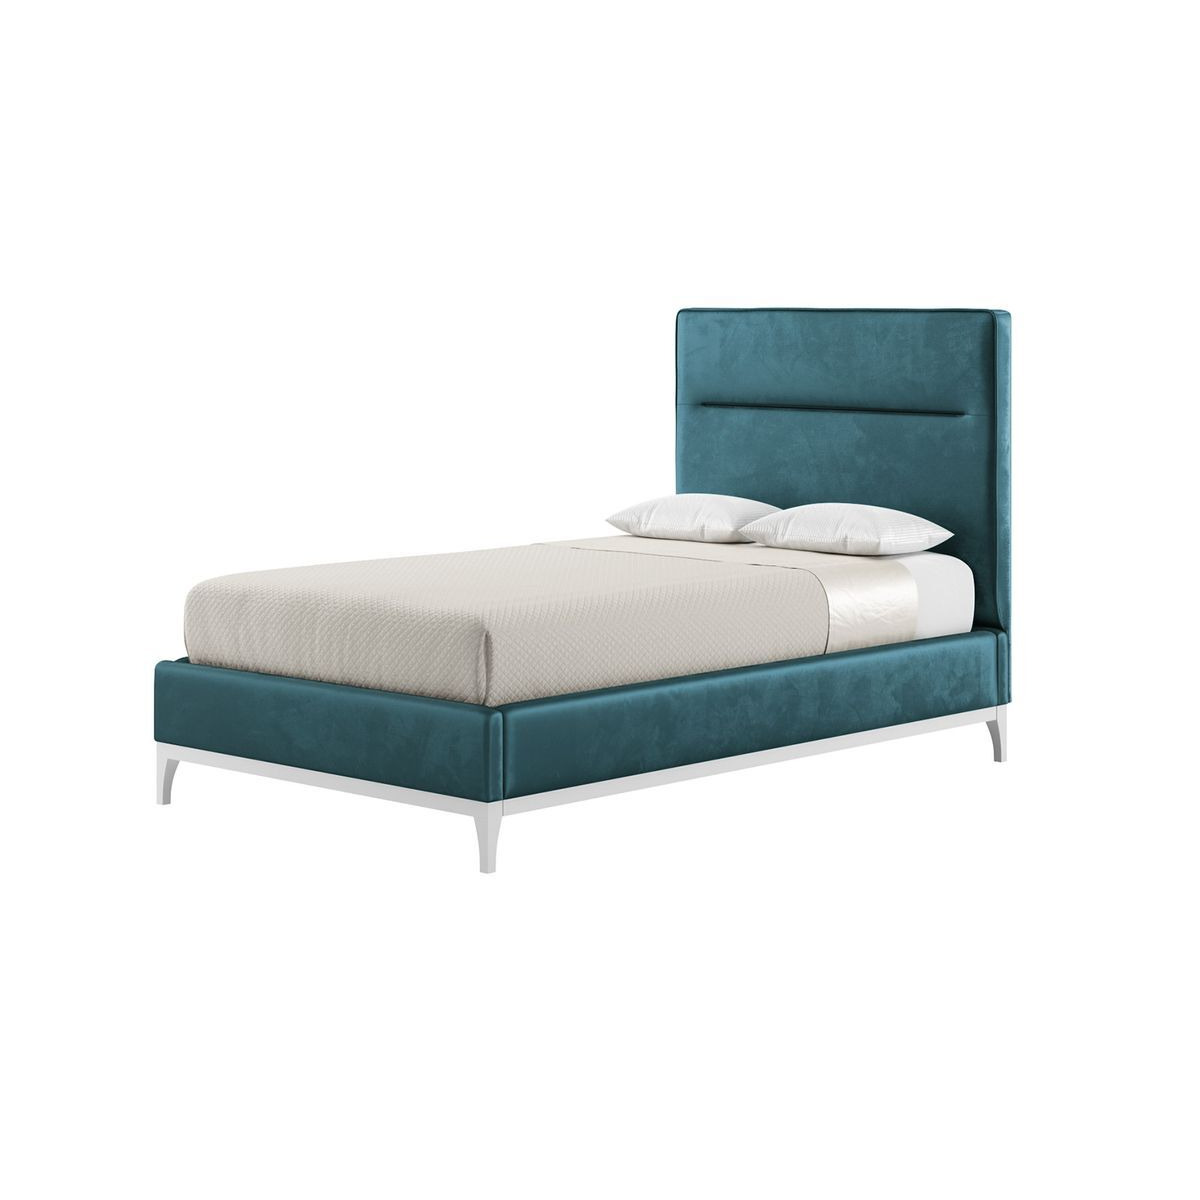 Gene 4ft Small Double Bed Frame with modern horizontal stitch headboard, dirty blue, Leg colour: white - image 1